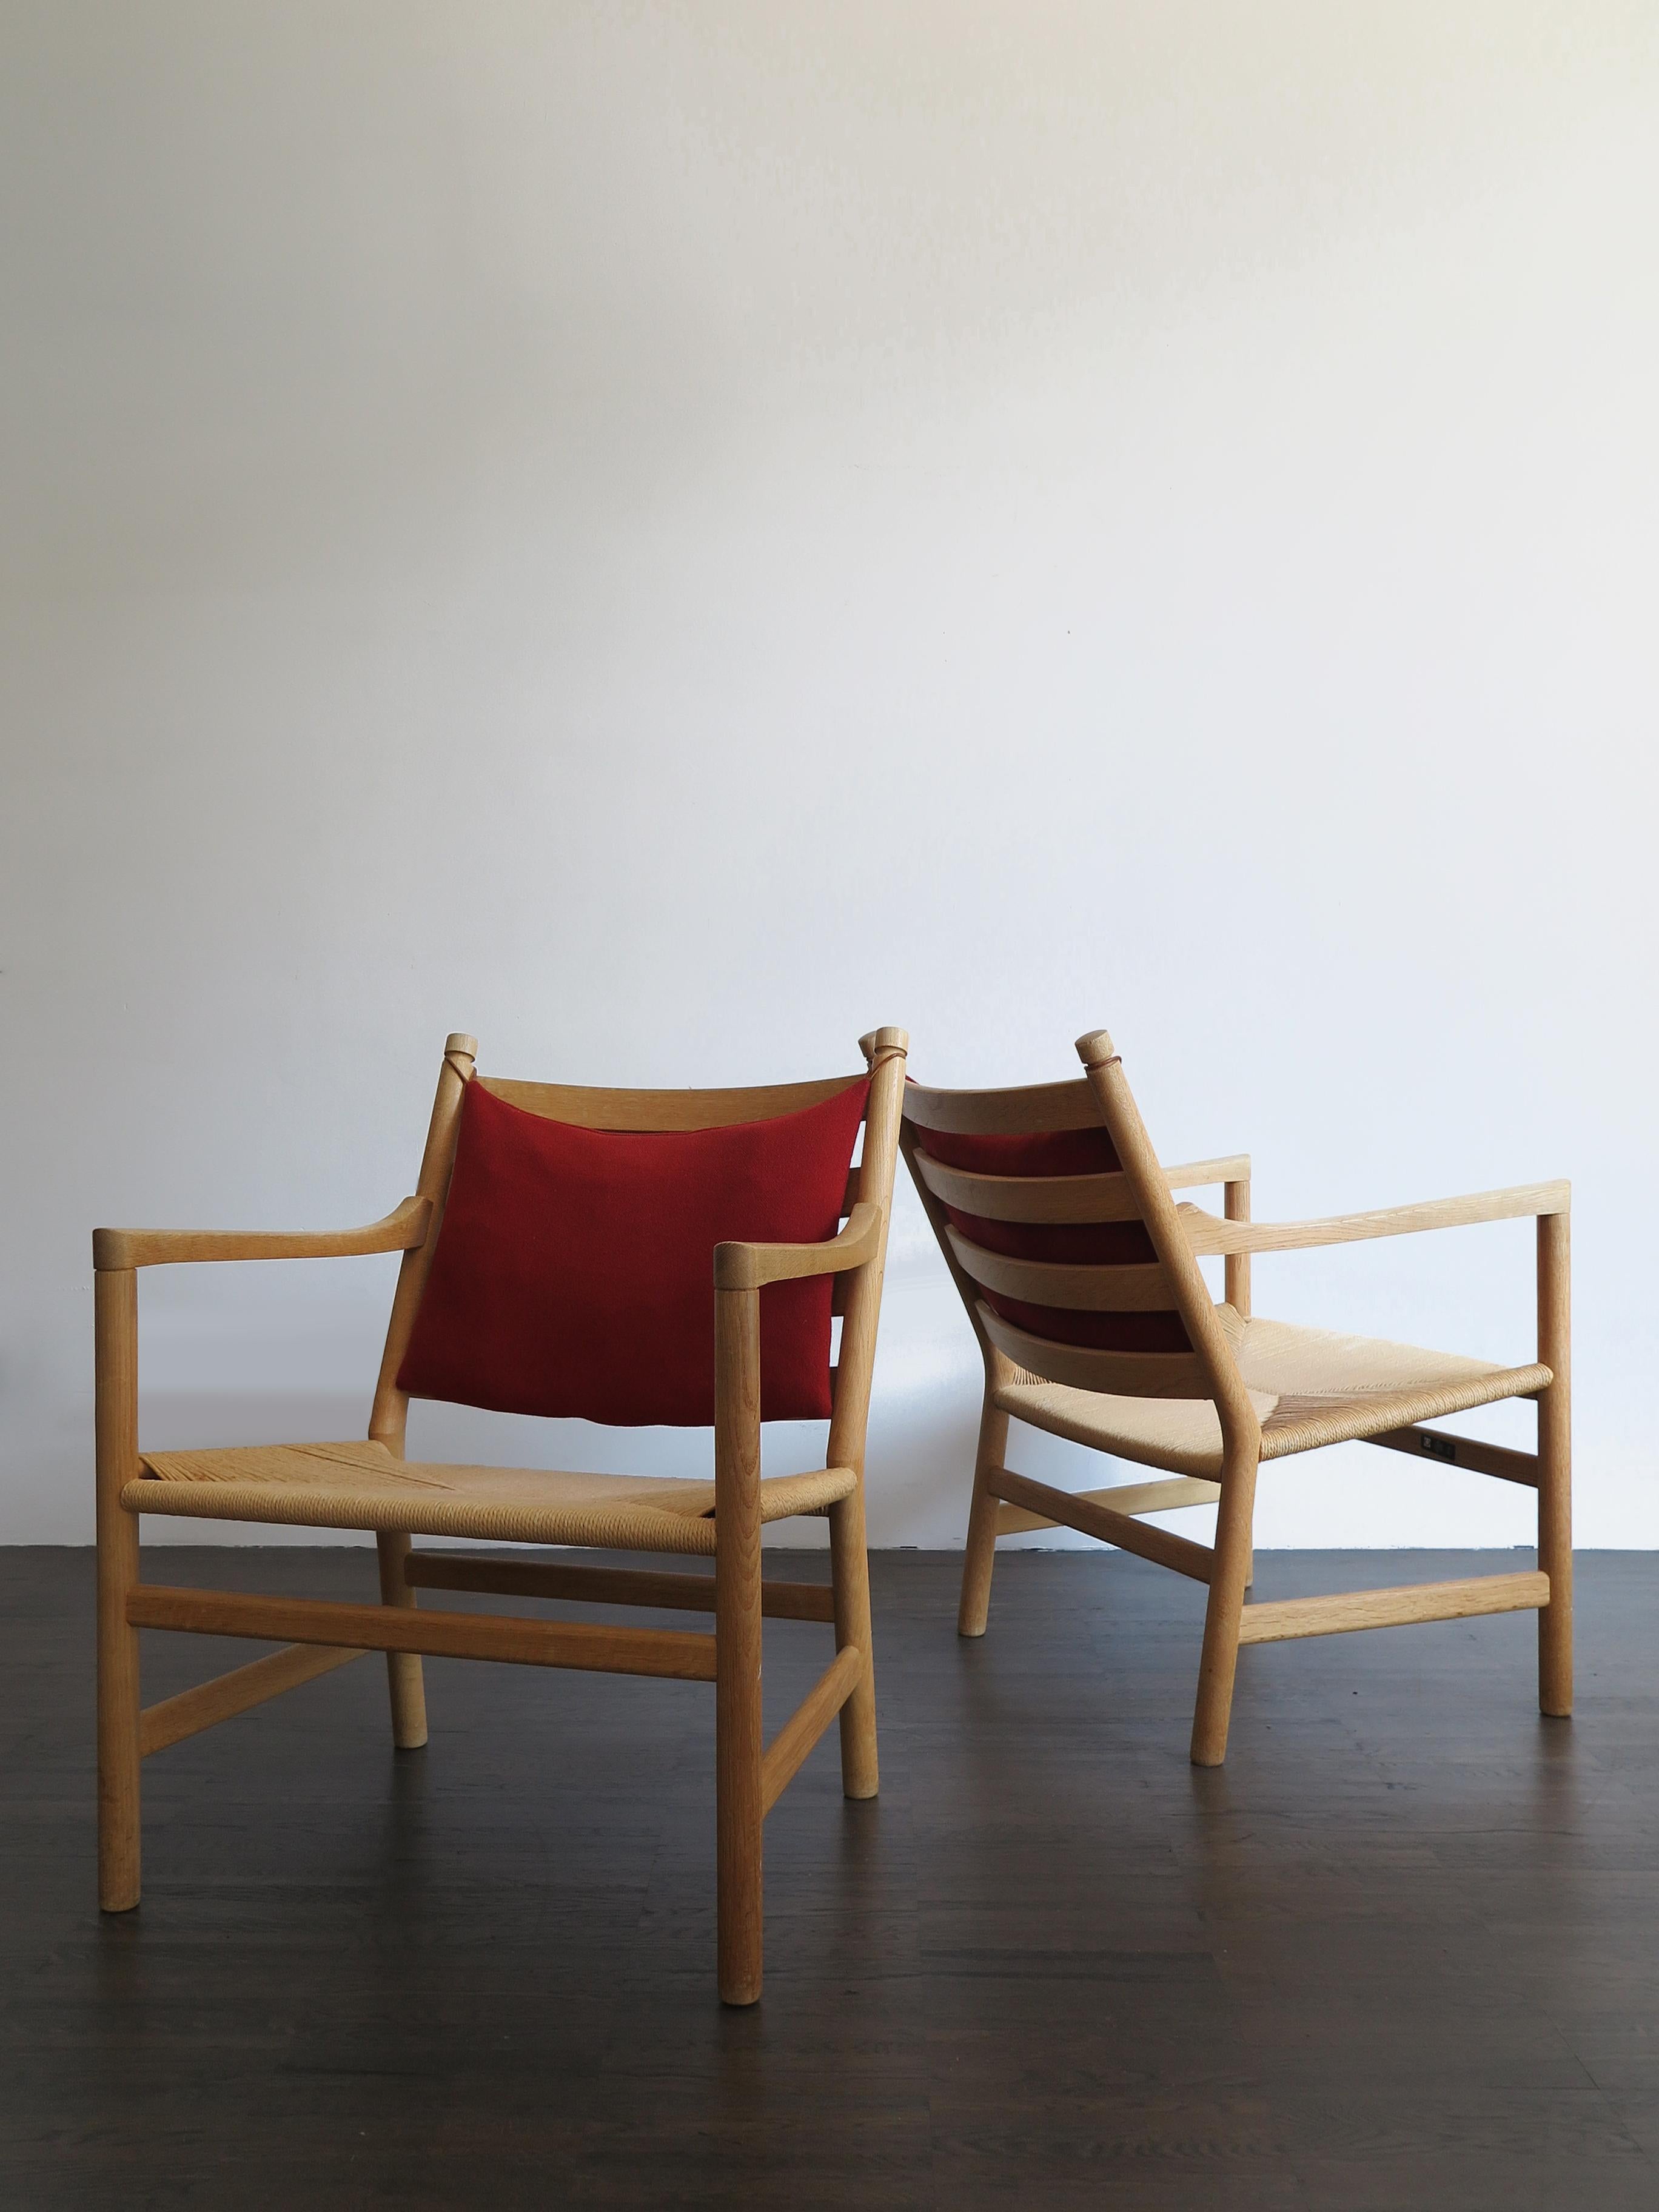 Pair of armchairs model CH44 designed by Hans Wegner and produced by Carl Hansen with solid oak frame and rope paper seat with fabric back cushion, 1990s Denmark production.
Manufacturer's sticker label.